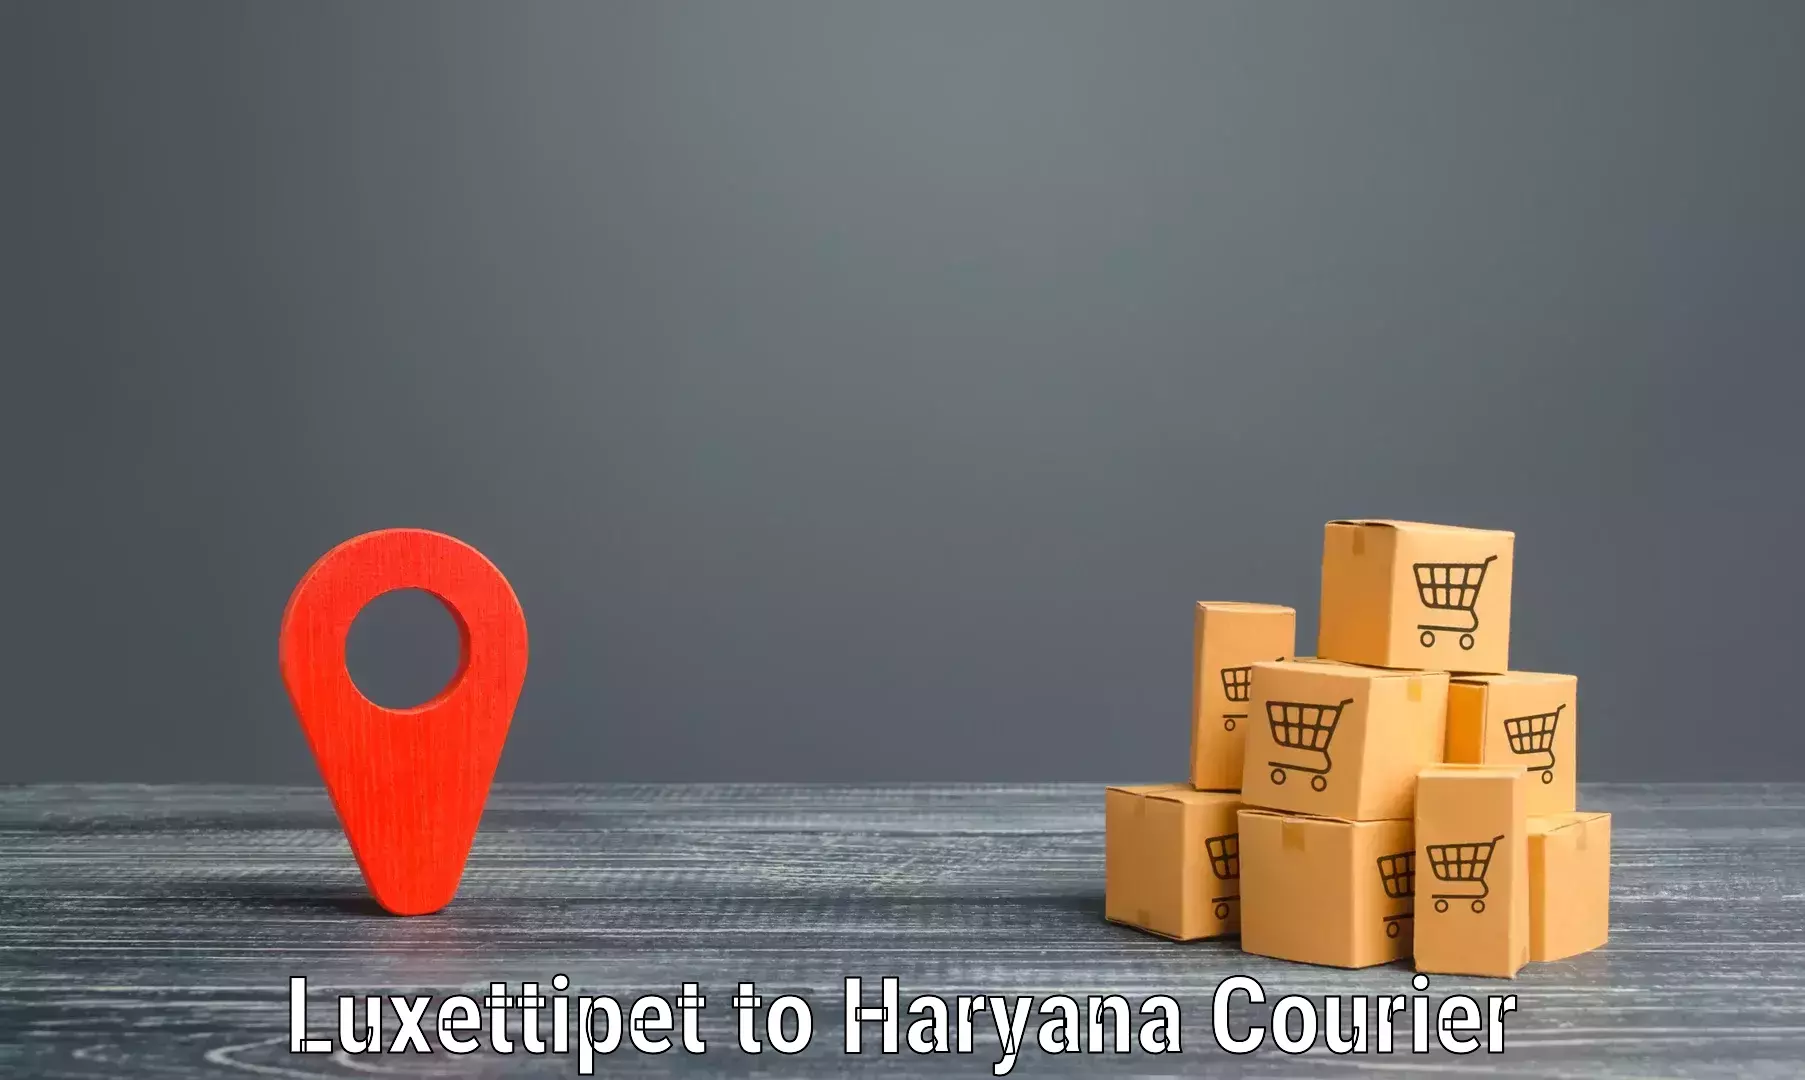 Quick parcel dispatch in Luxettipet to Hansi